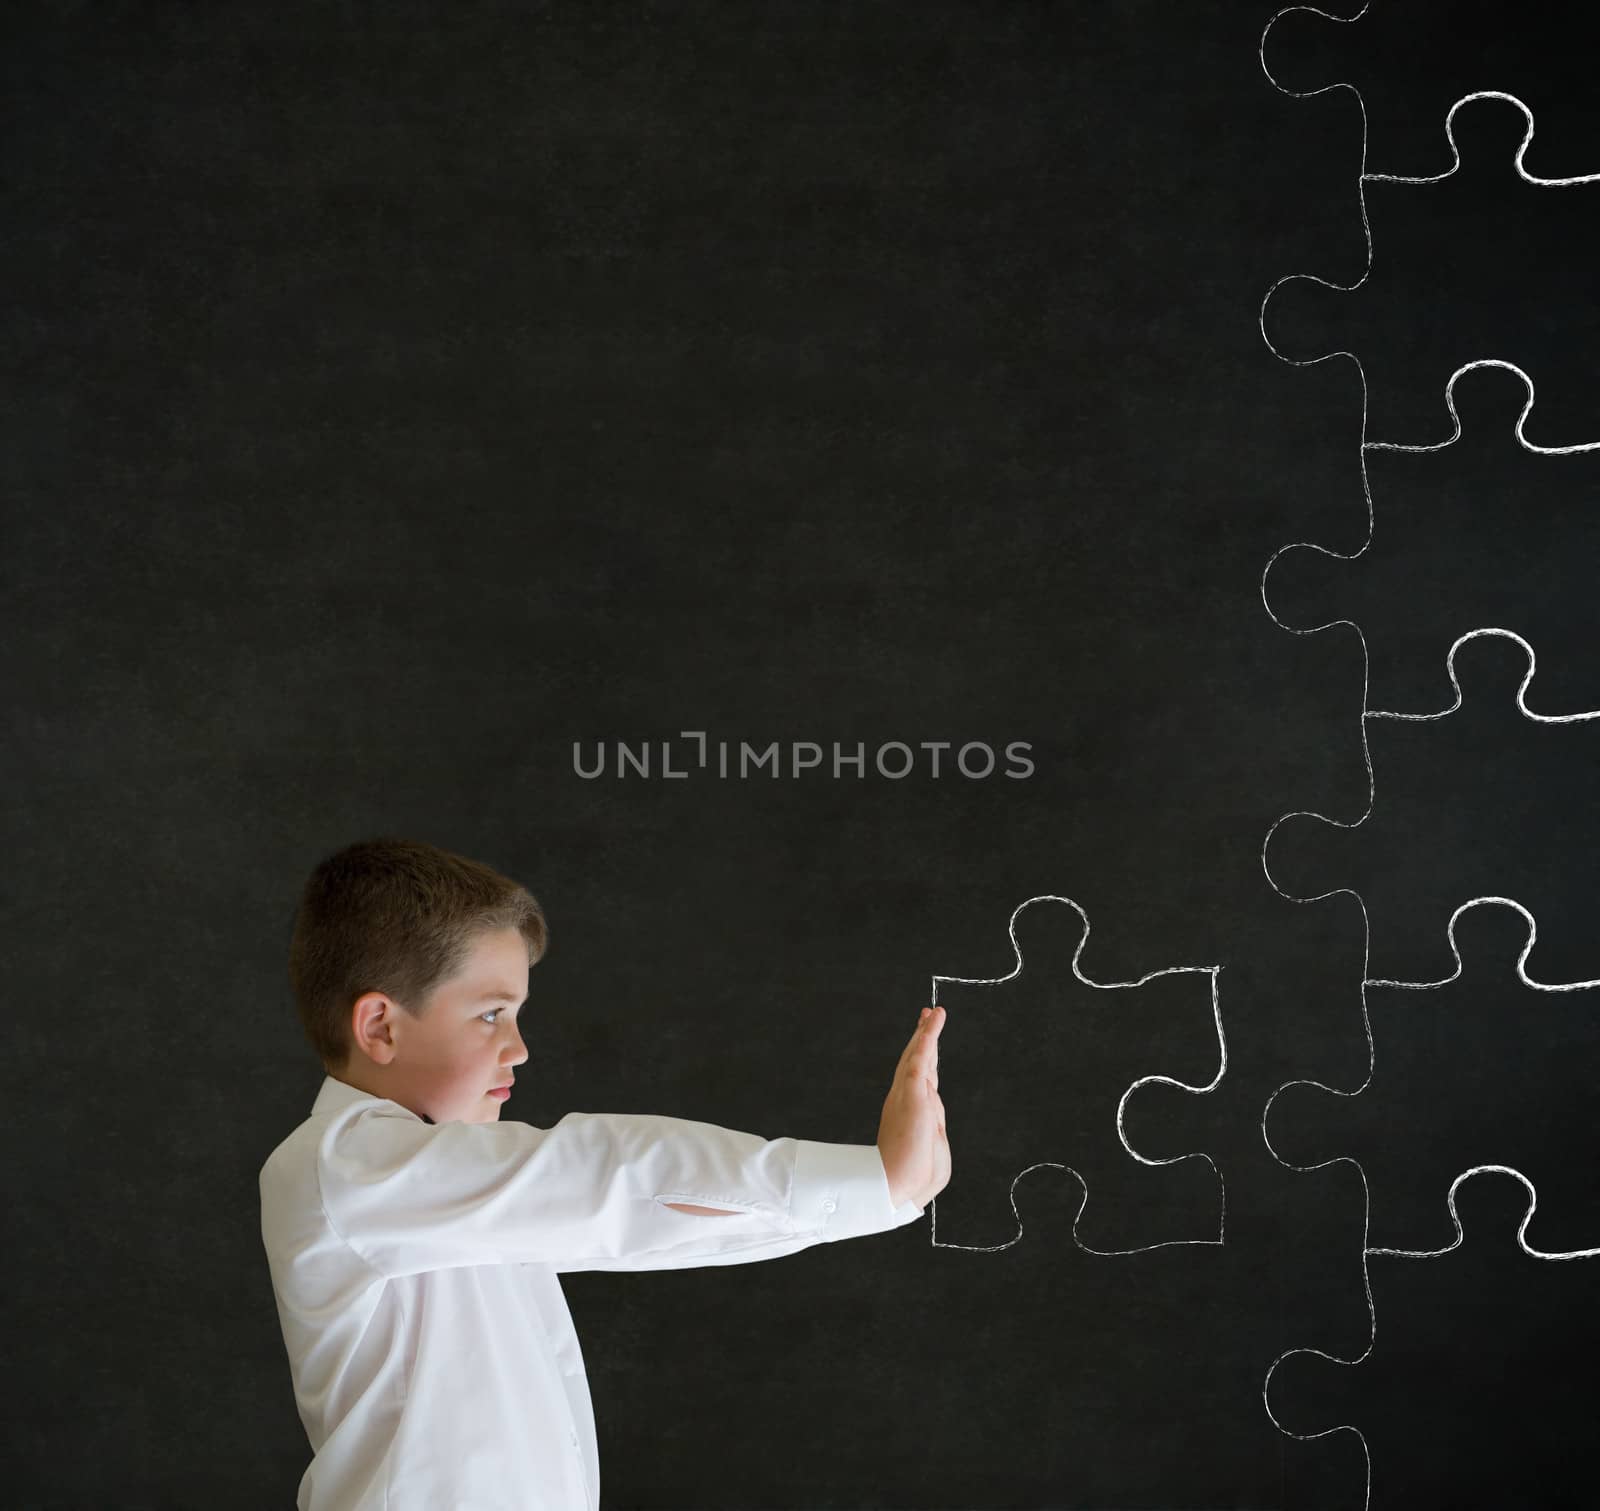 Boy pushing puzzle piece on blackboard background by alistaircotton